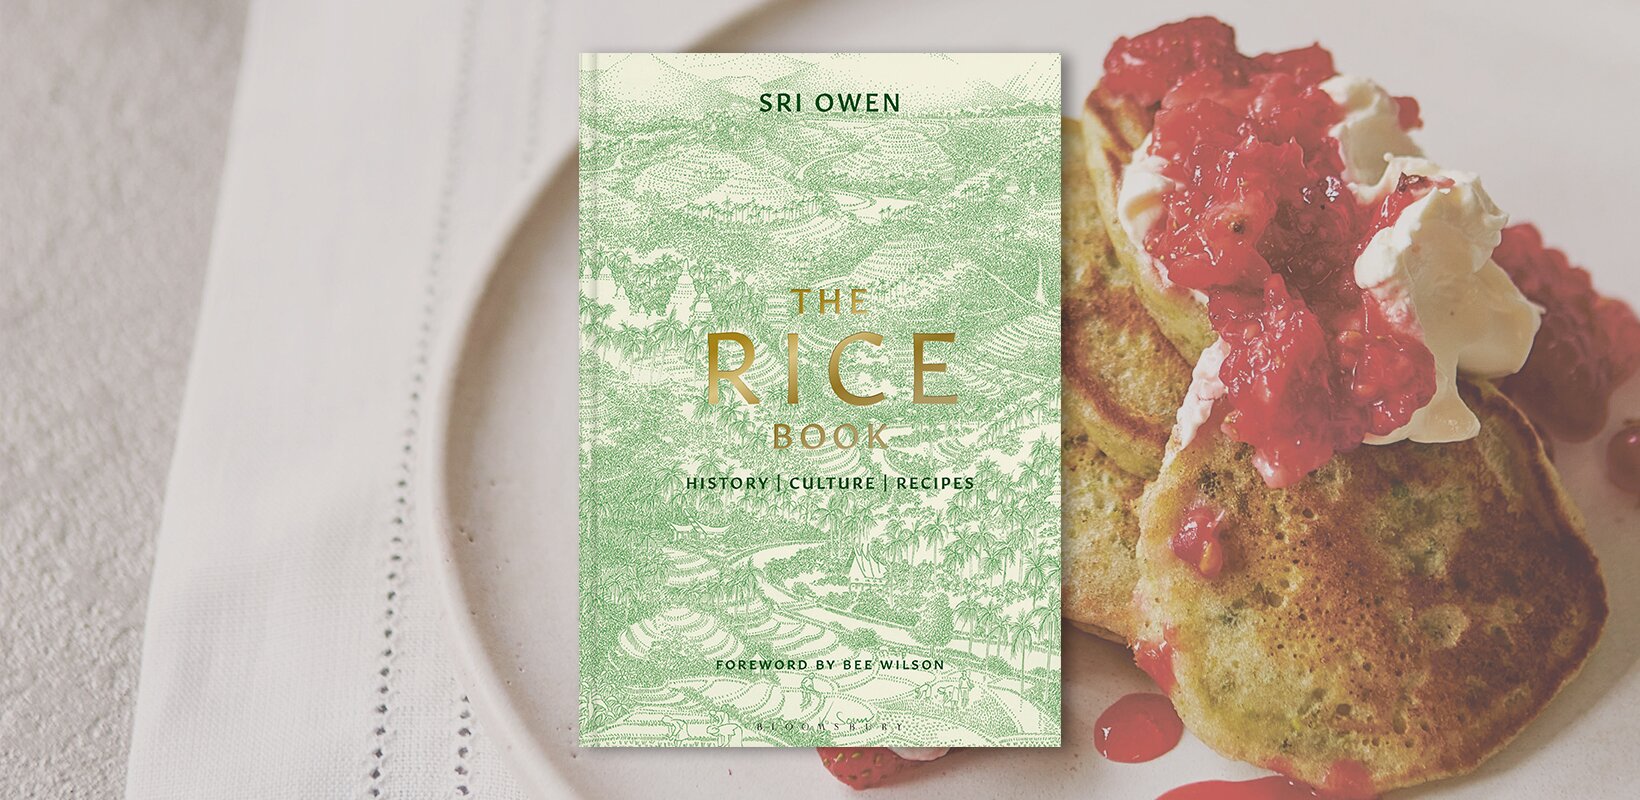 Book review: The Rice Book by Sri Owen